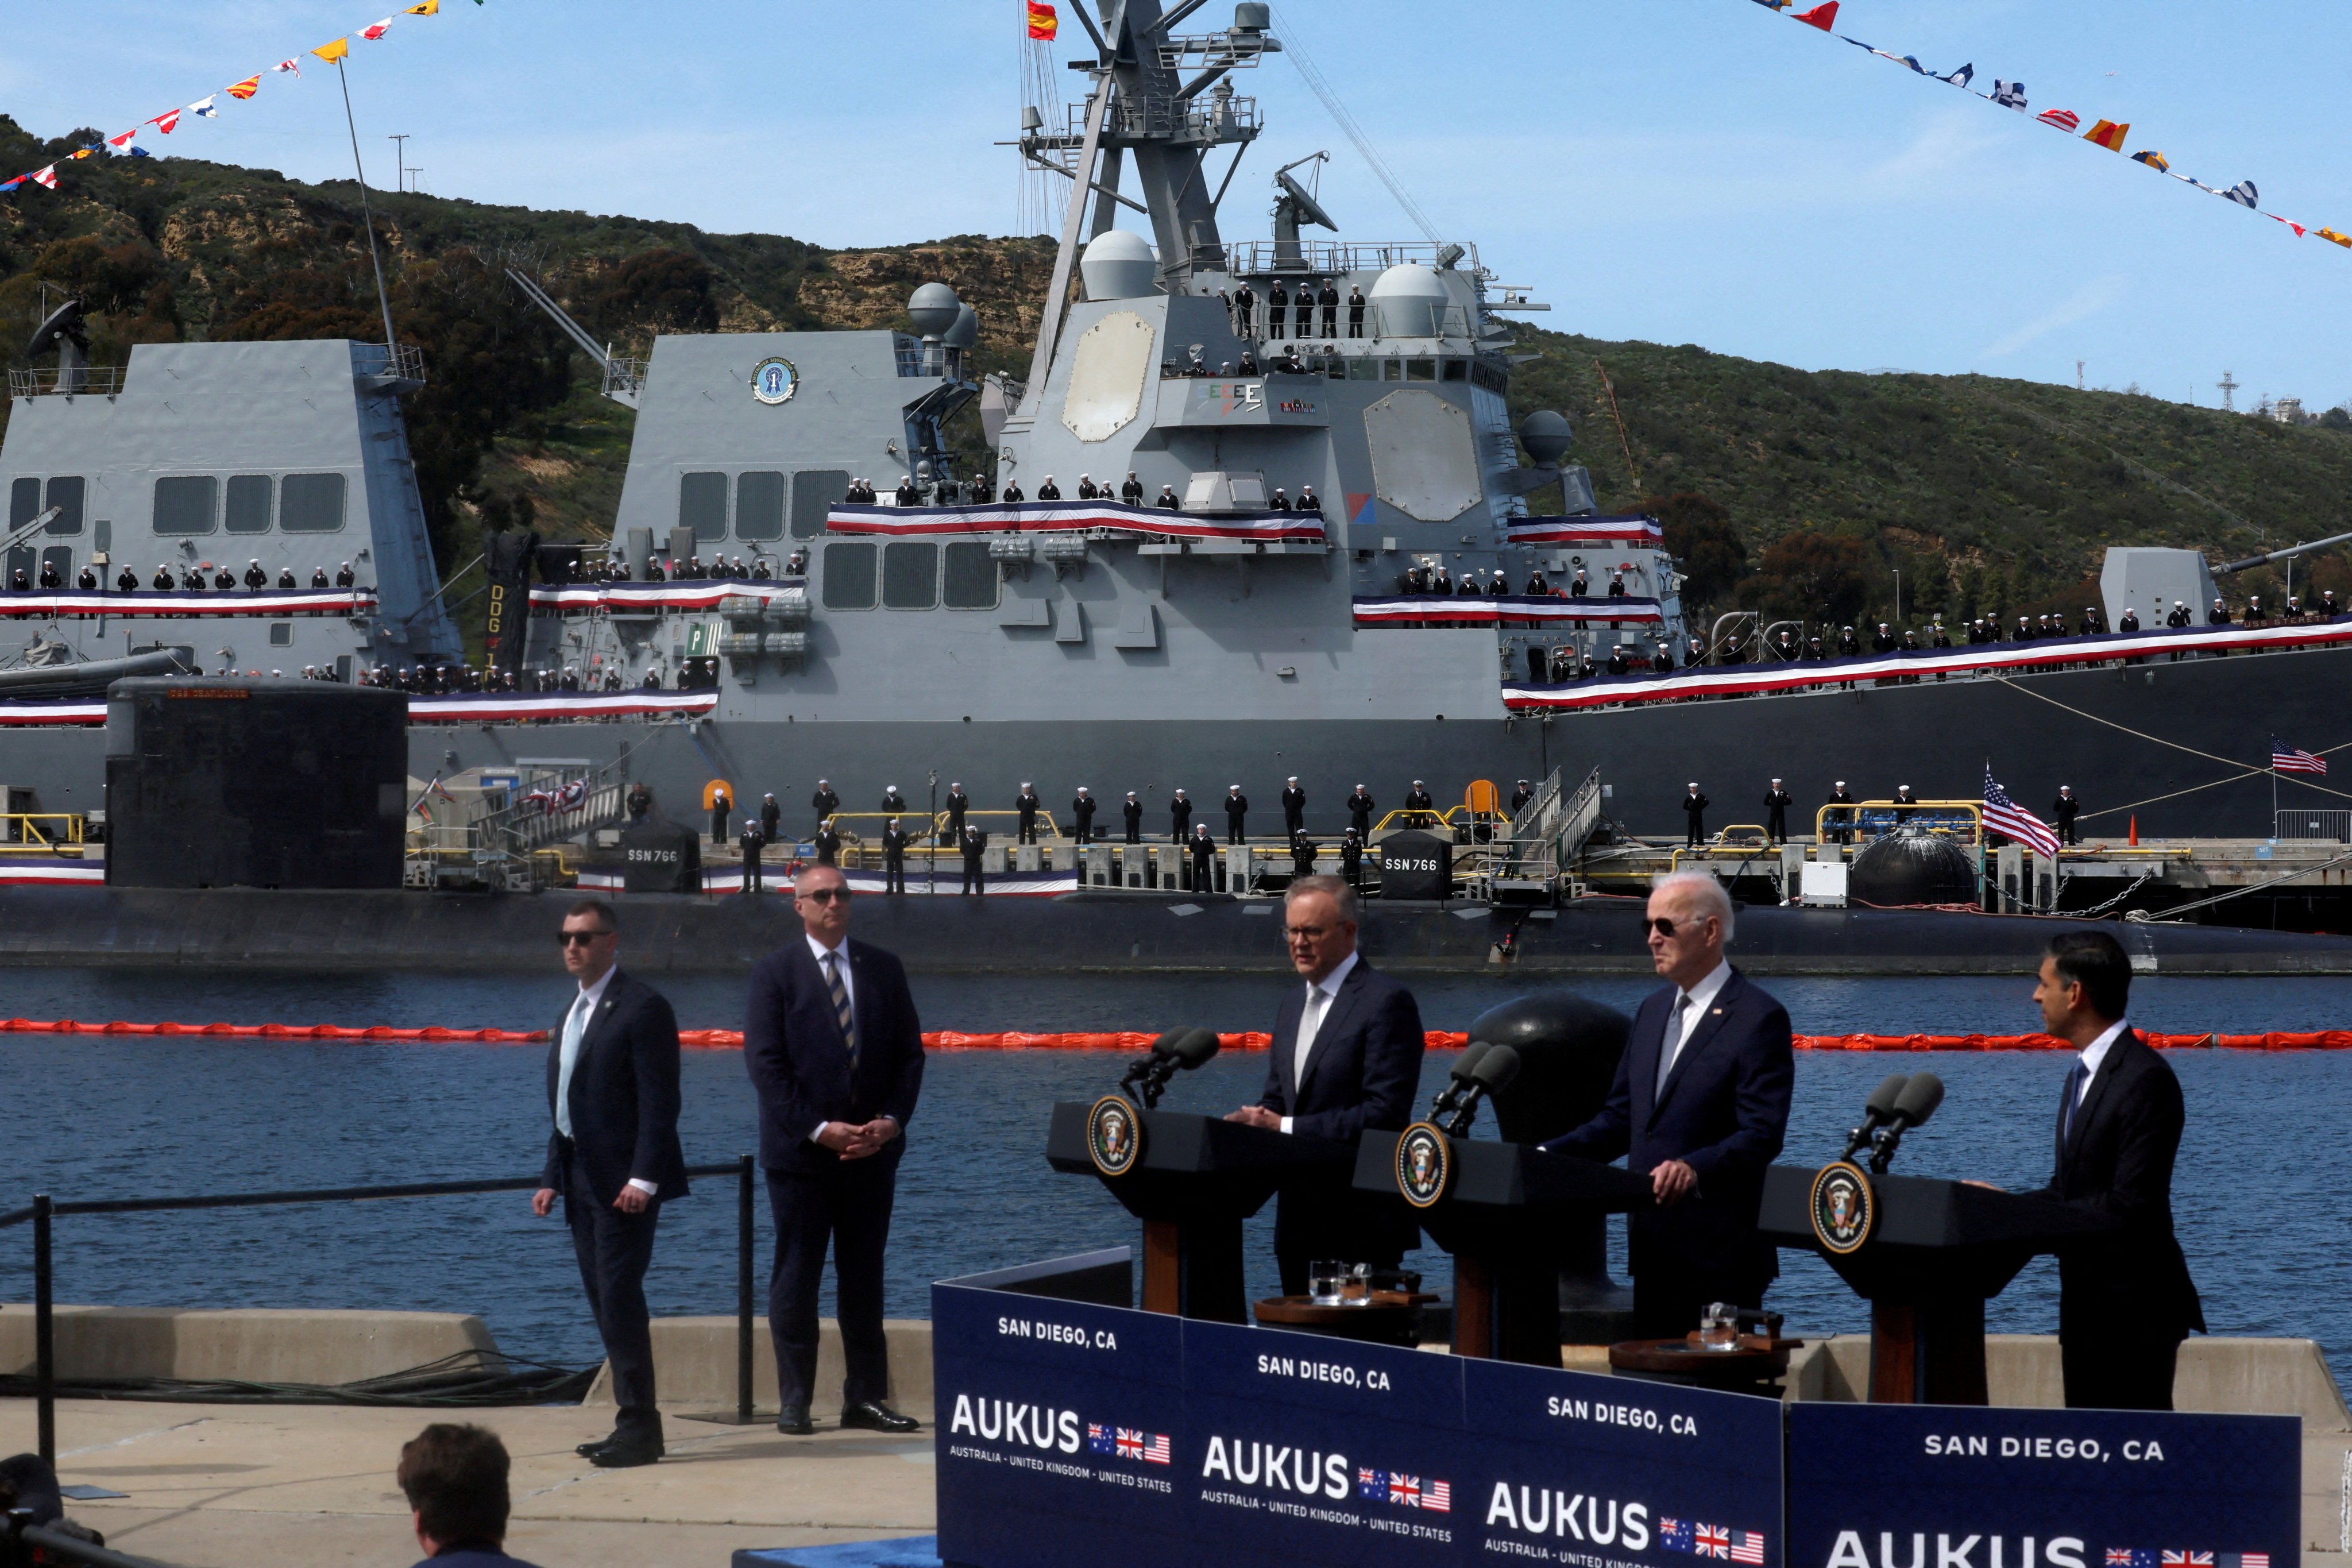 US President Joe Biden, Australian Prime Minister Anthony Albanese and British Prime Minister Rishi Sunak deliver remarks on the Aukus partnership in San Diego, California on. March 13, 2023. Photo: Reuters